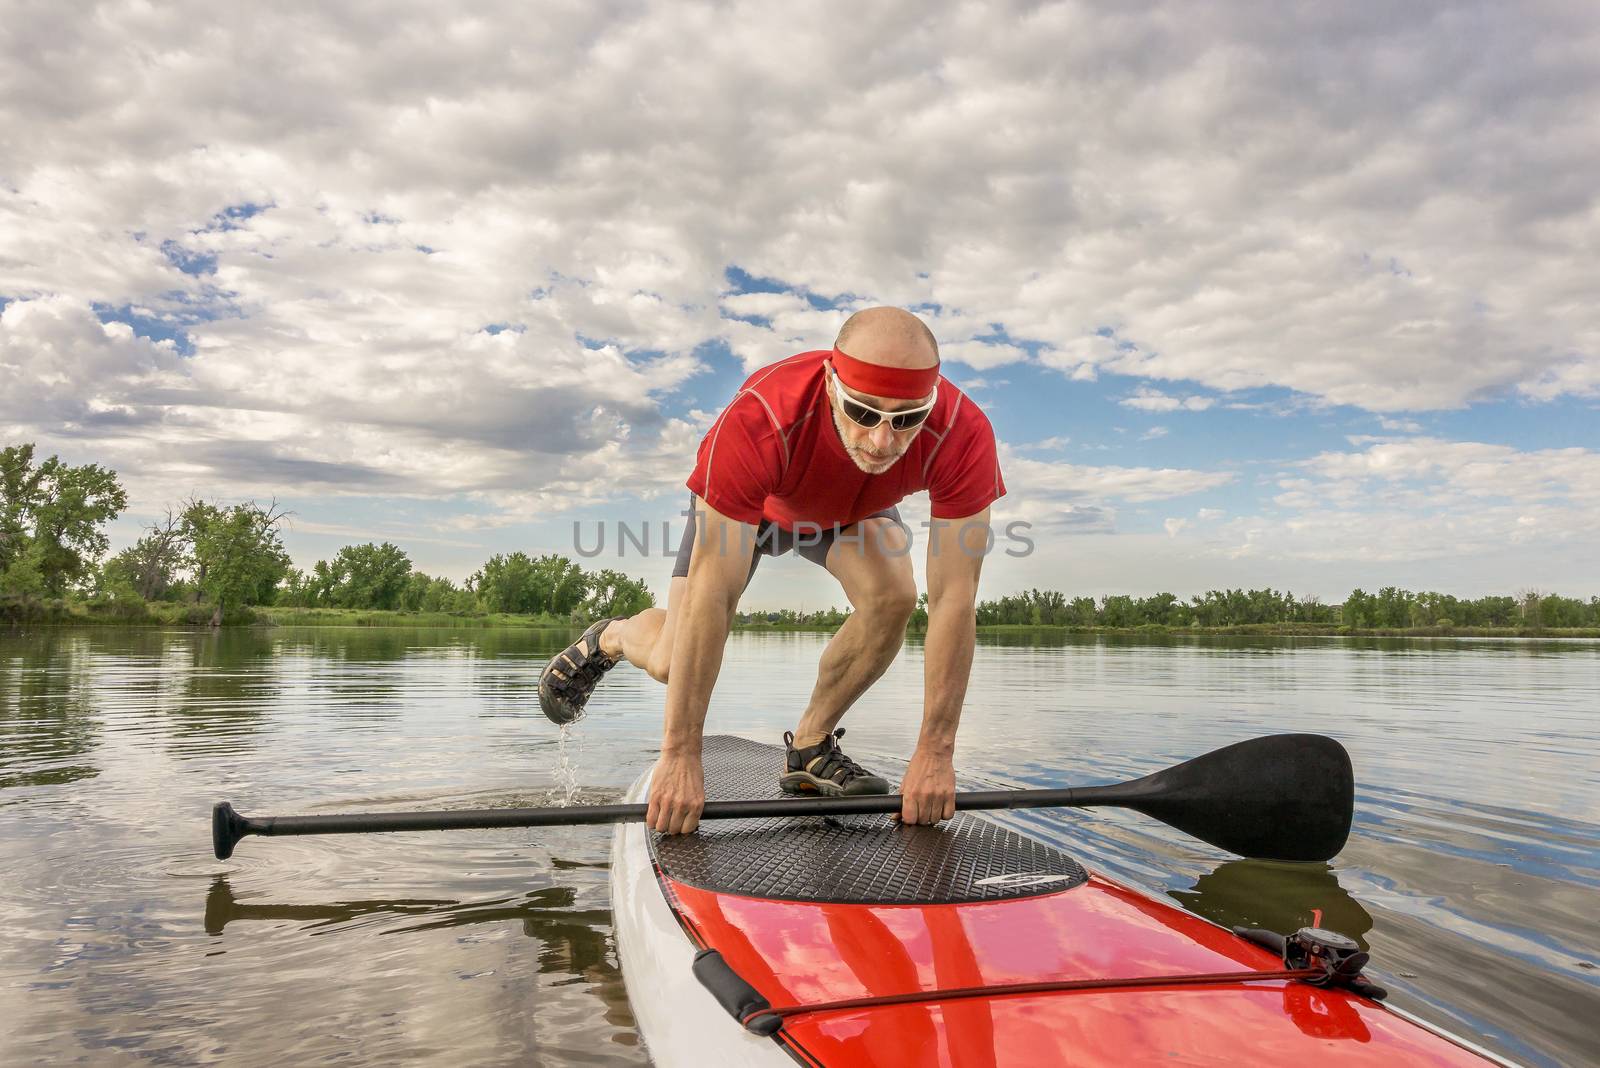 stand up paddling on a lake in Colorado by PixelsAway